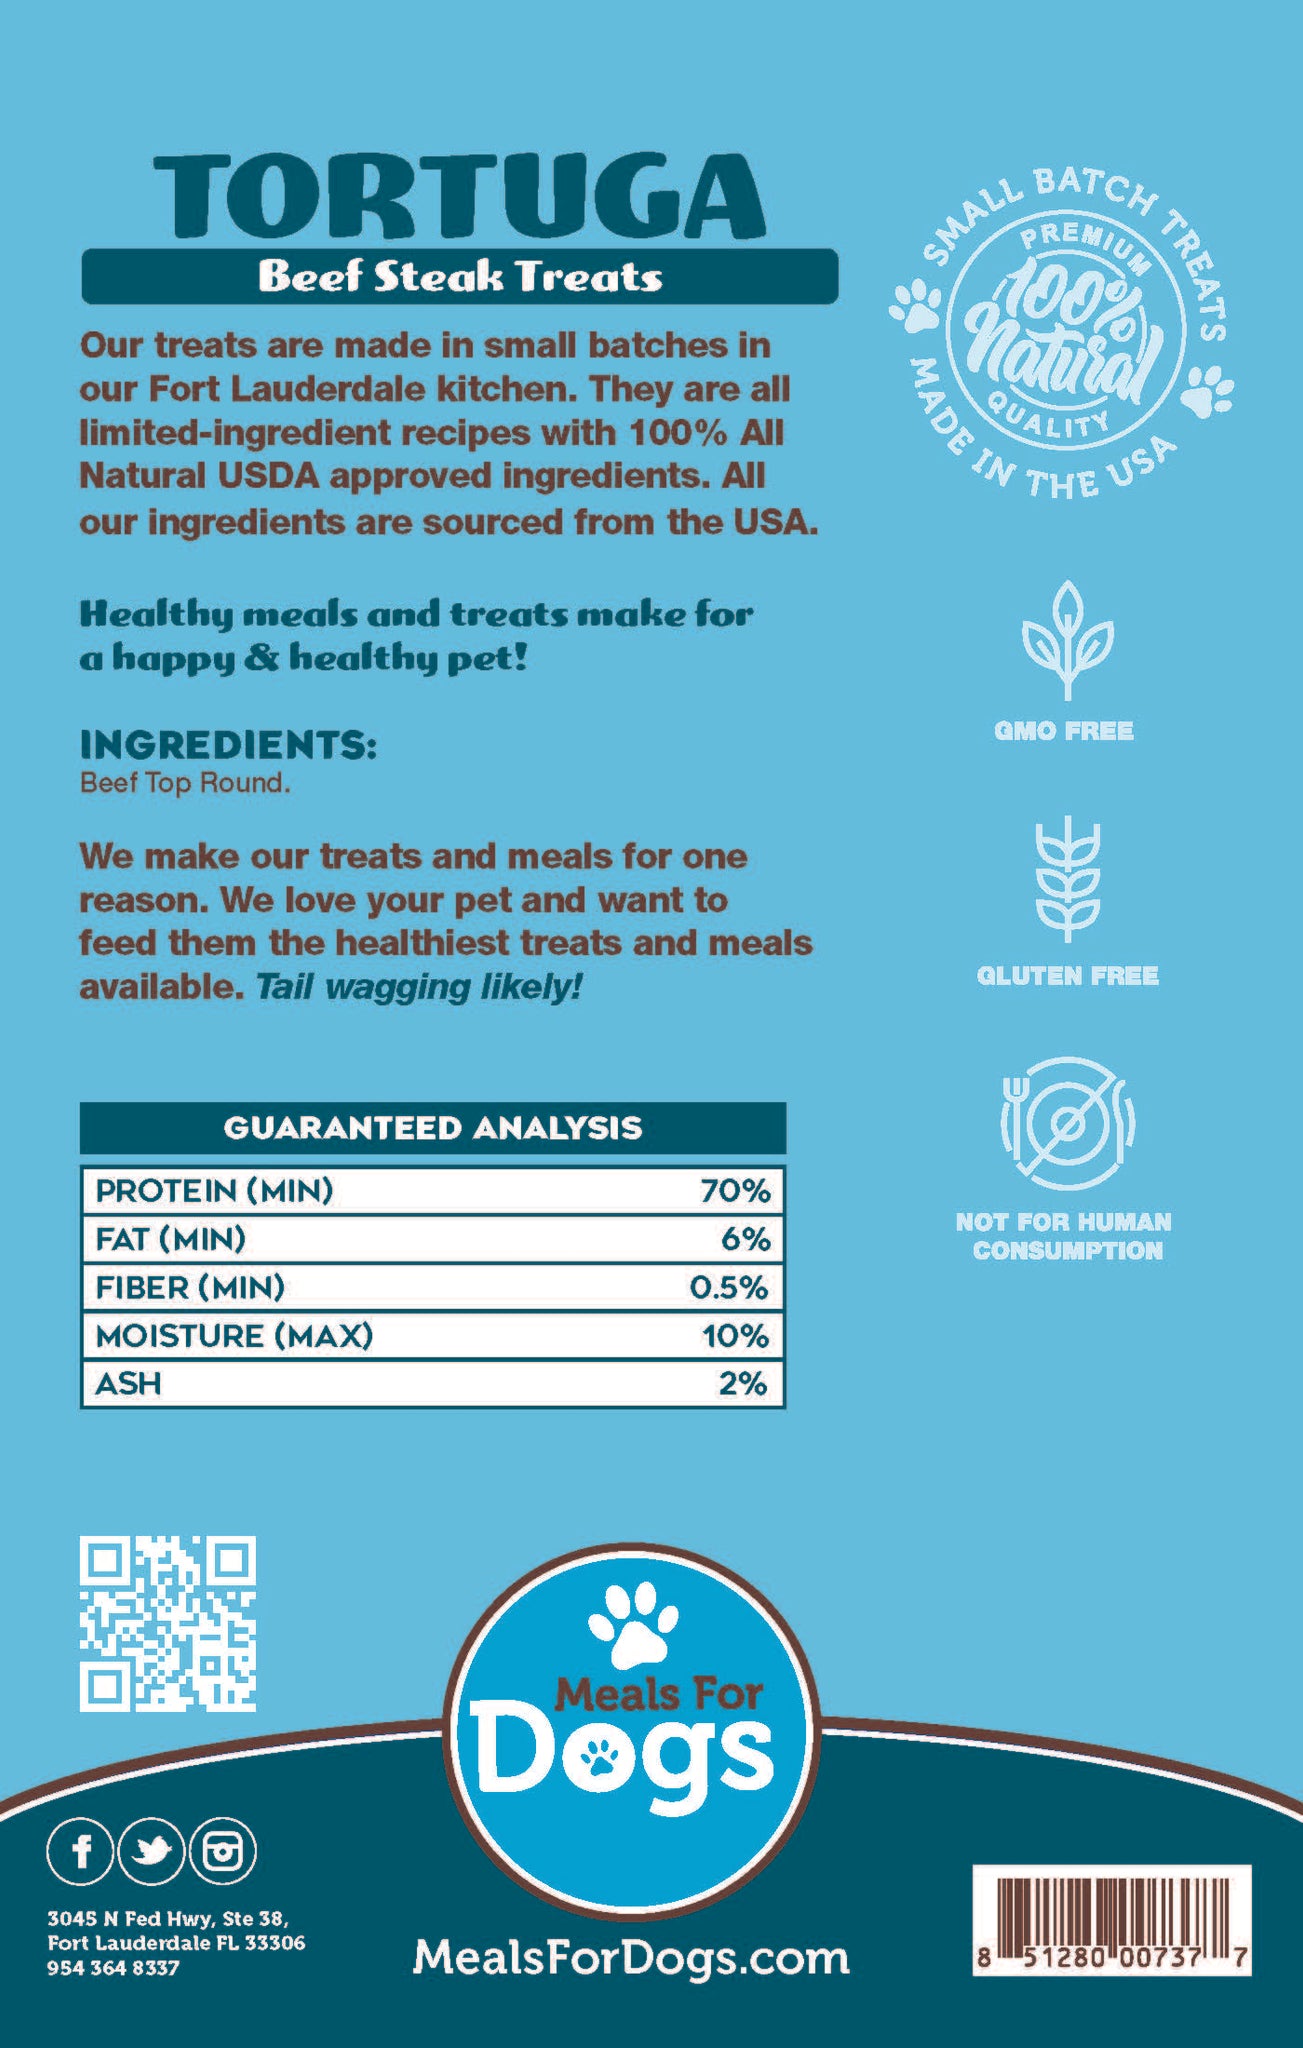 Tortuga  Beef Steak Treats | Meals for Dogs